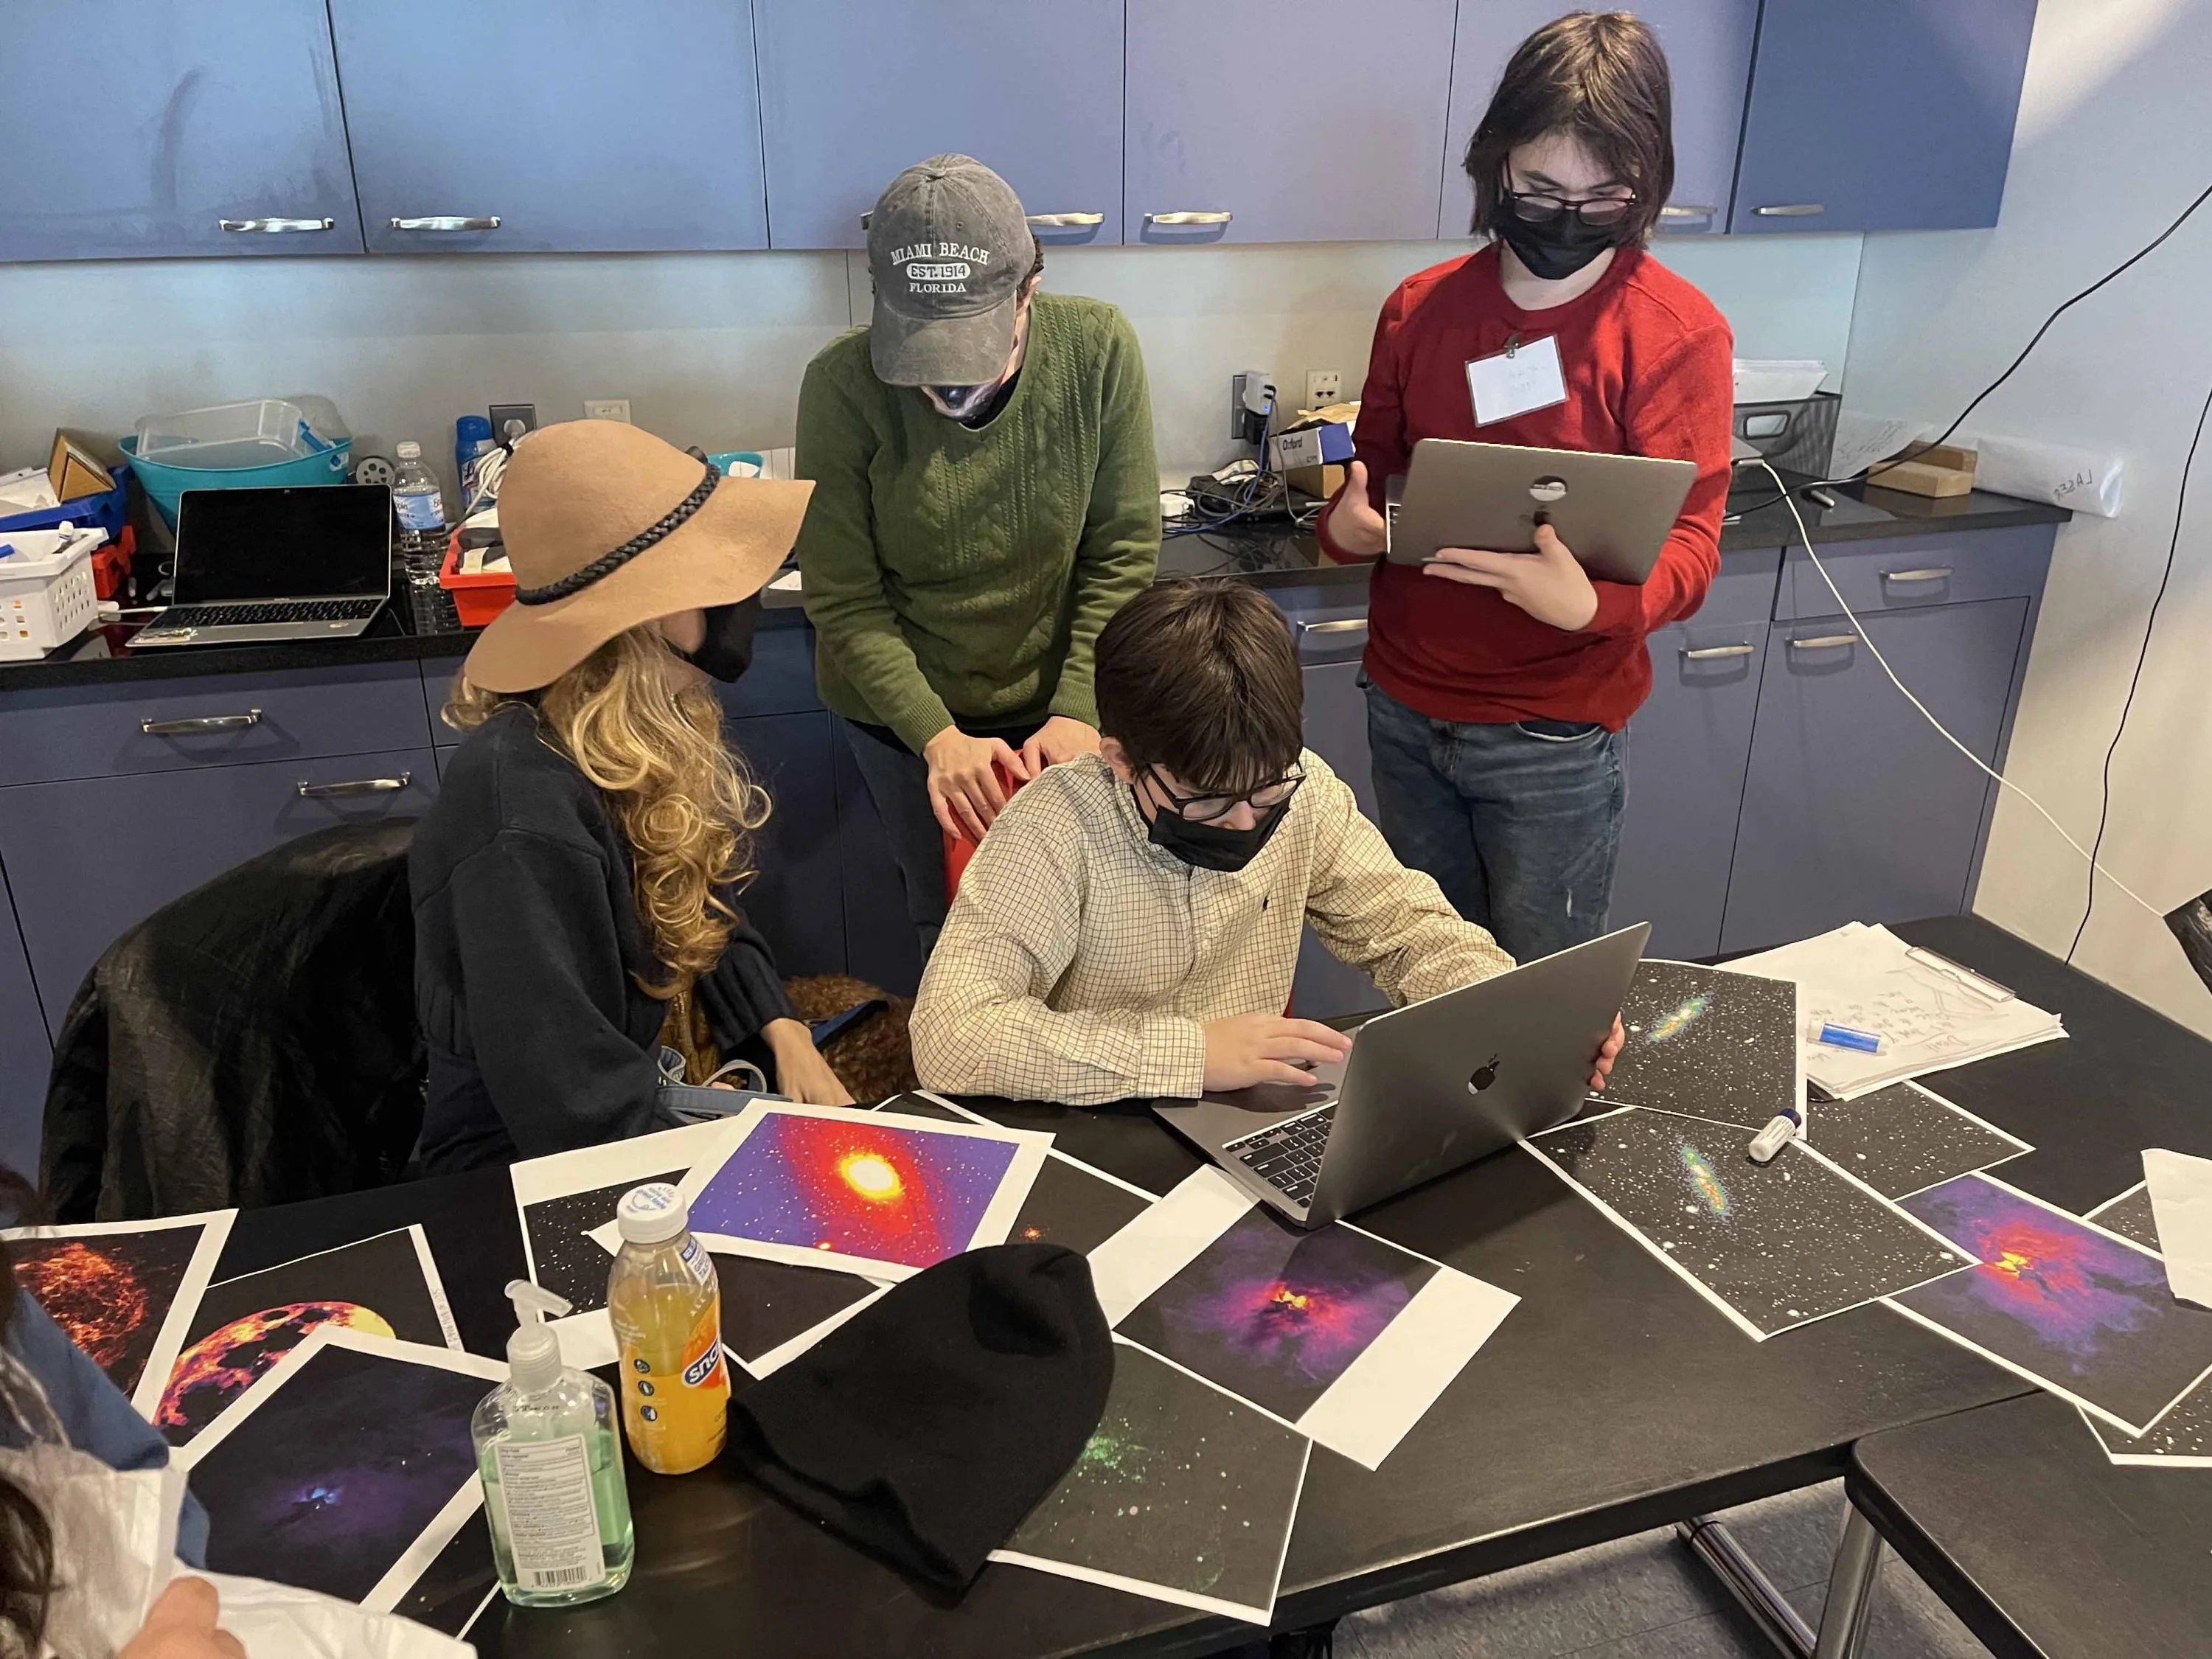 Docents at the New York Hall of Science work with a group of students who are learning about astronomical images in multiple wavelengths of light.